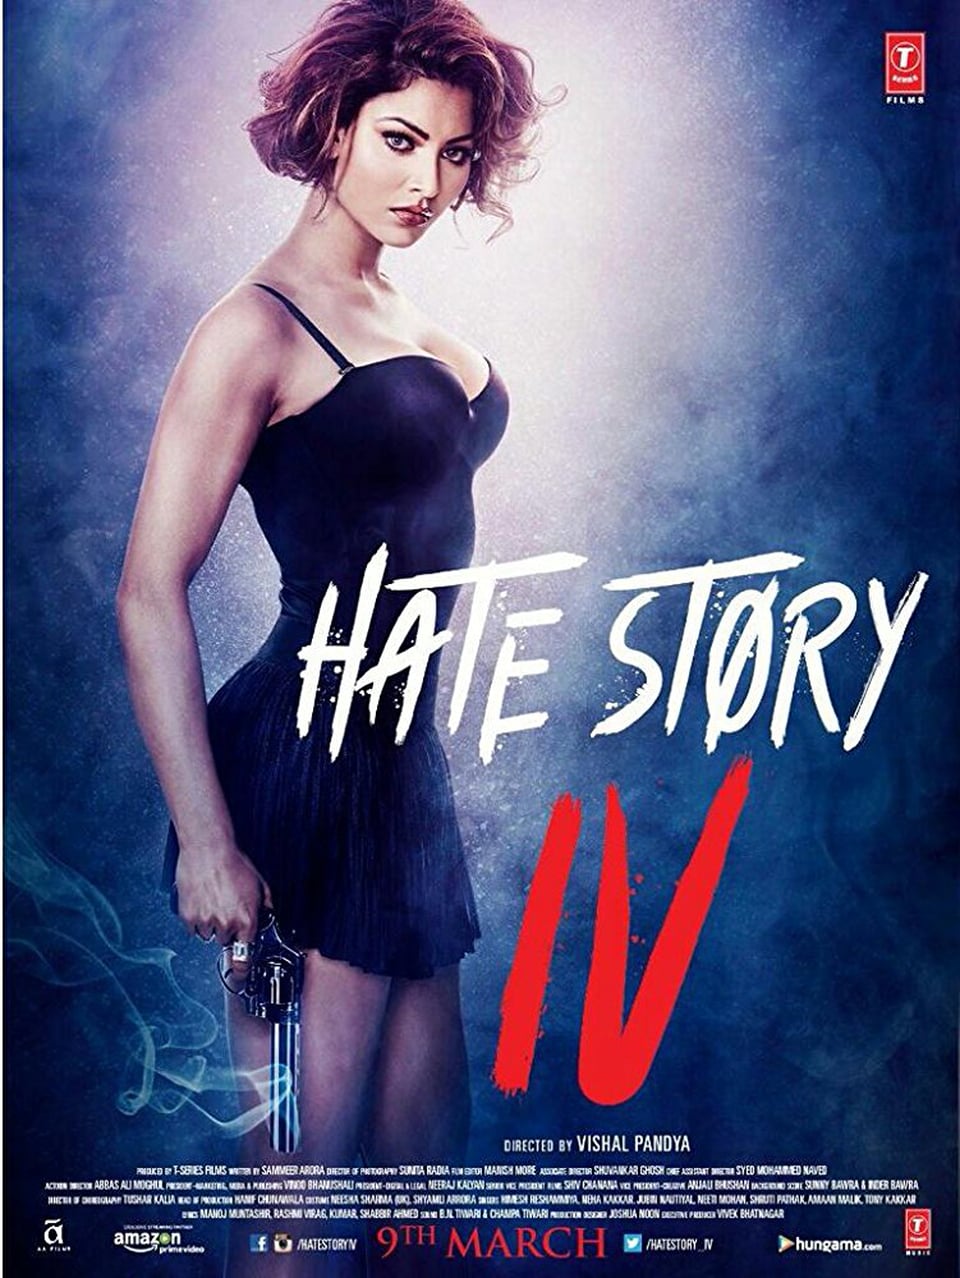 Hate Story IV (2018) First Look Poster